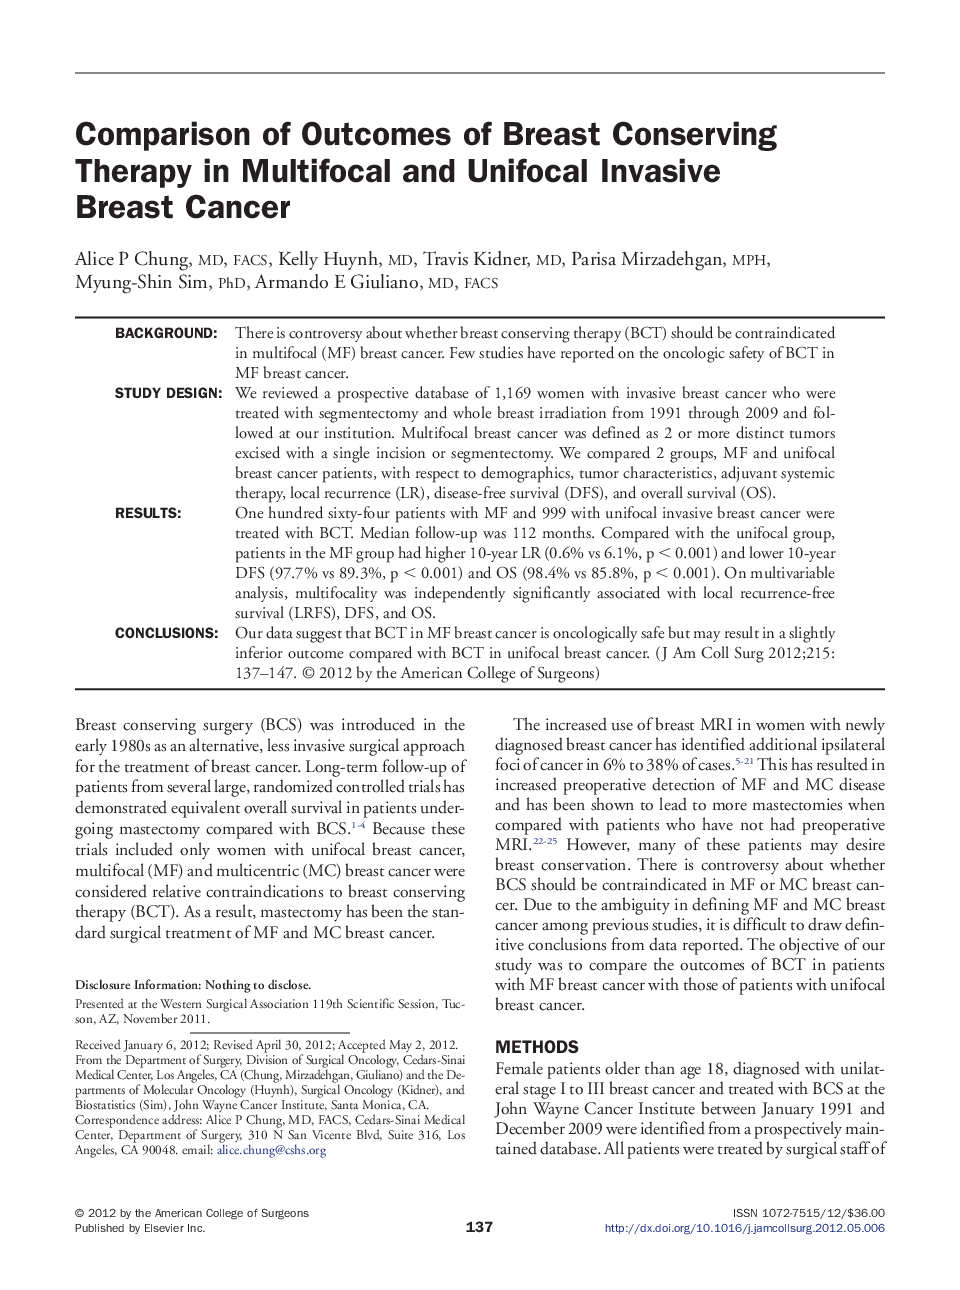 Comparison of Outcomes of Breast Conserving Therapy in Multifocal and Unifocal Invasive Breast Cancer 